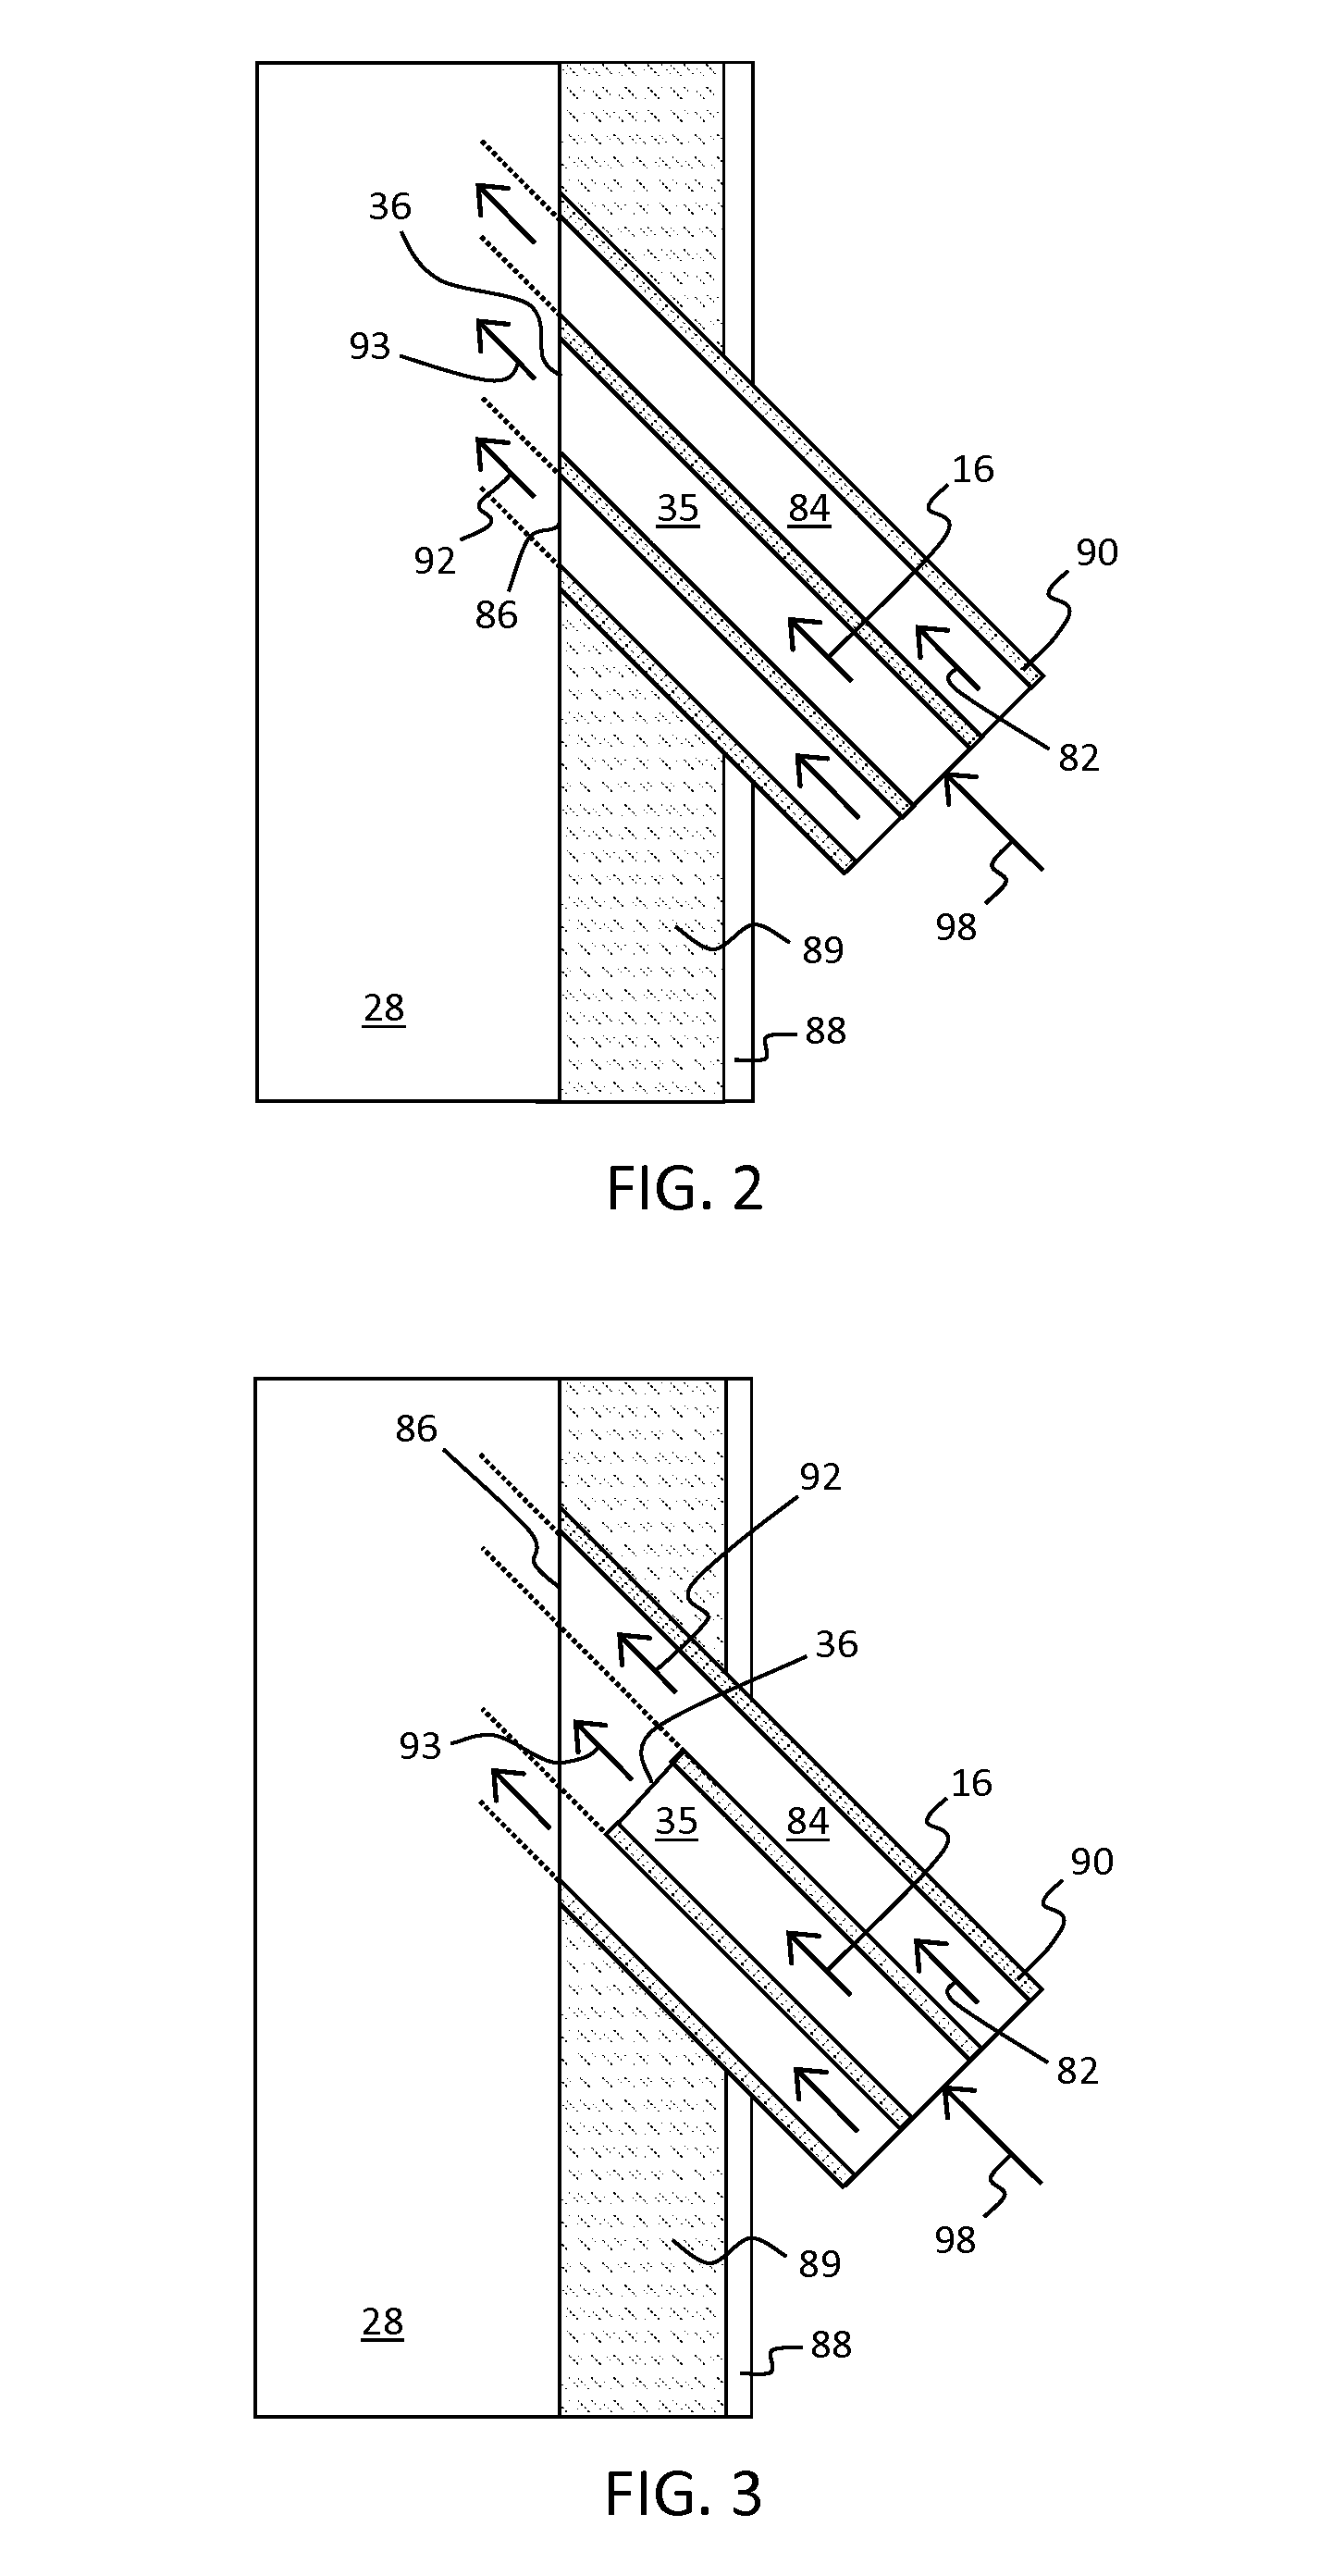 Fcc units, apparatuses and methods for processing pyrolysis oil and hydrocarbon streams